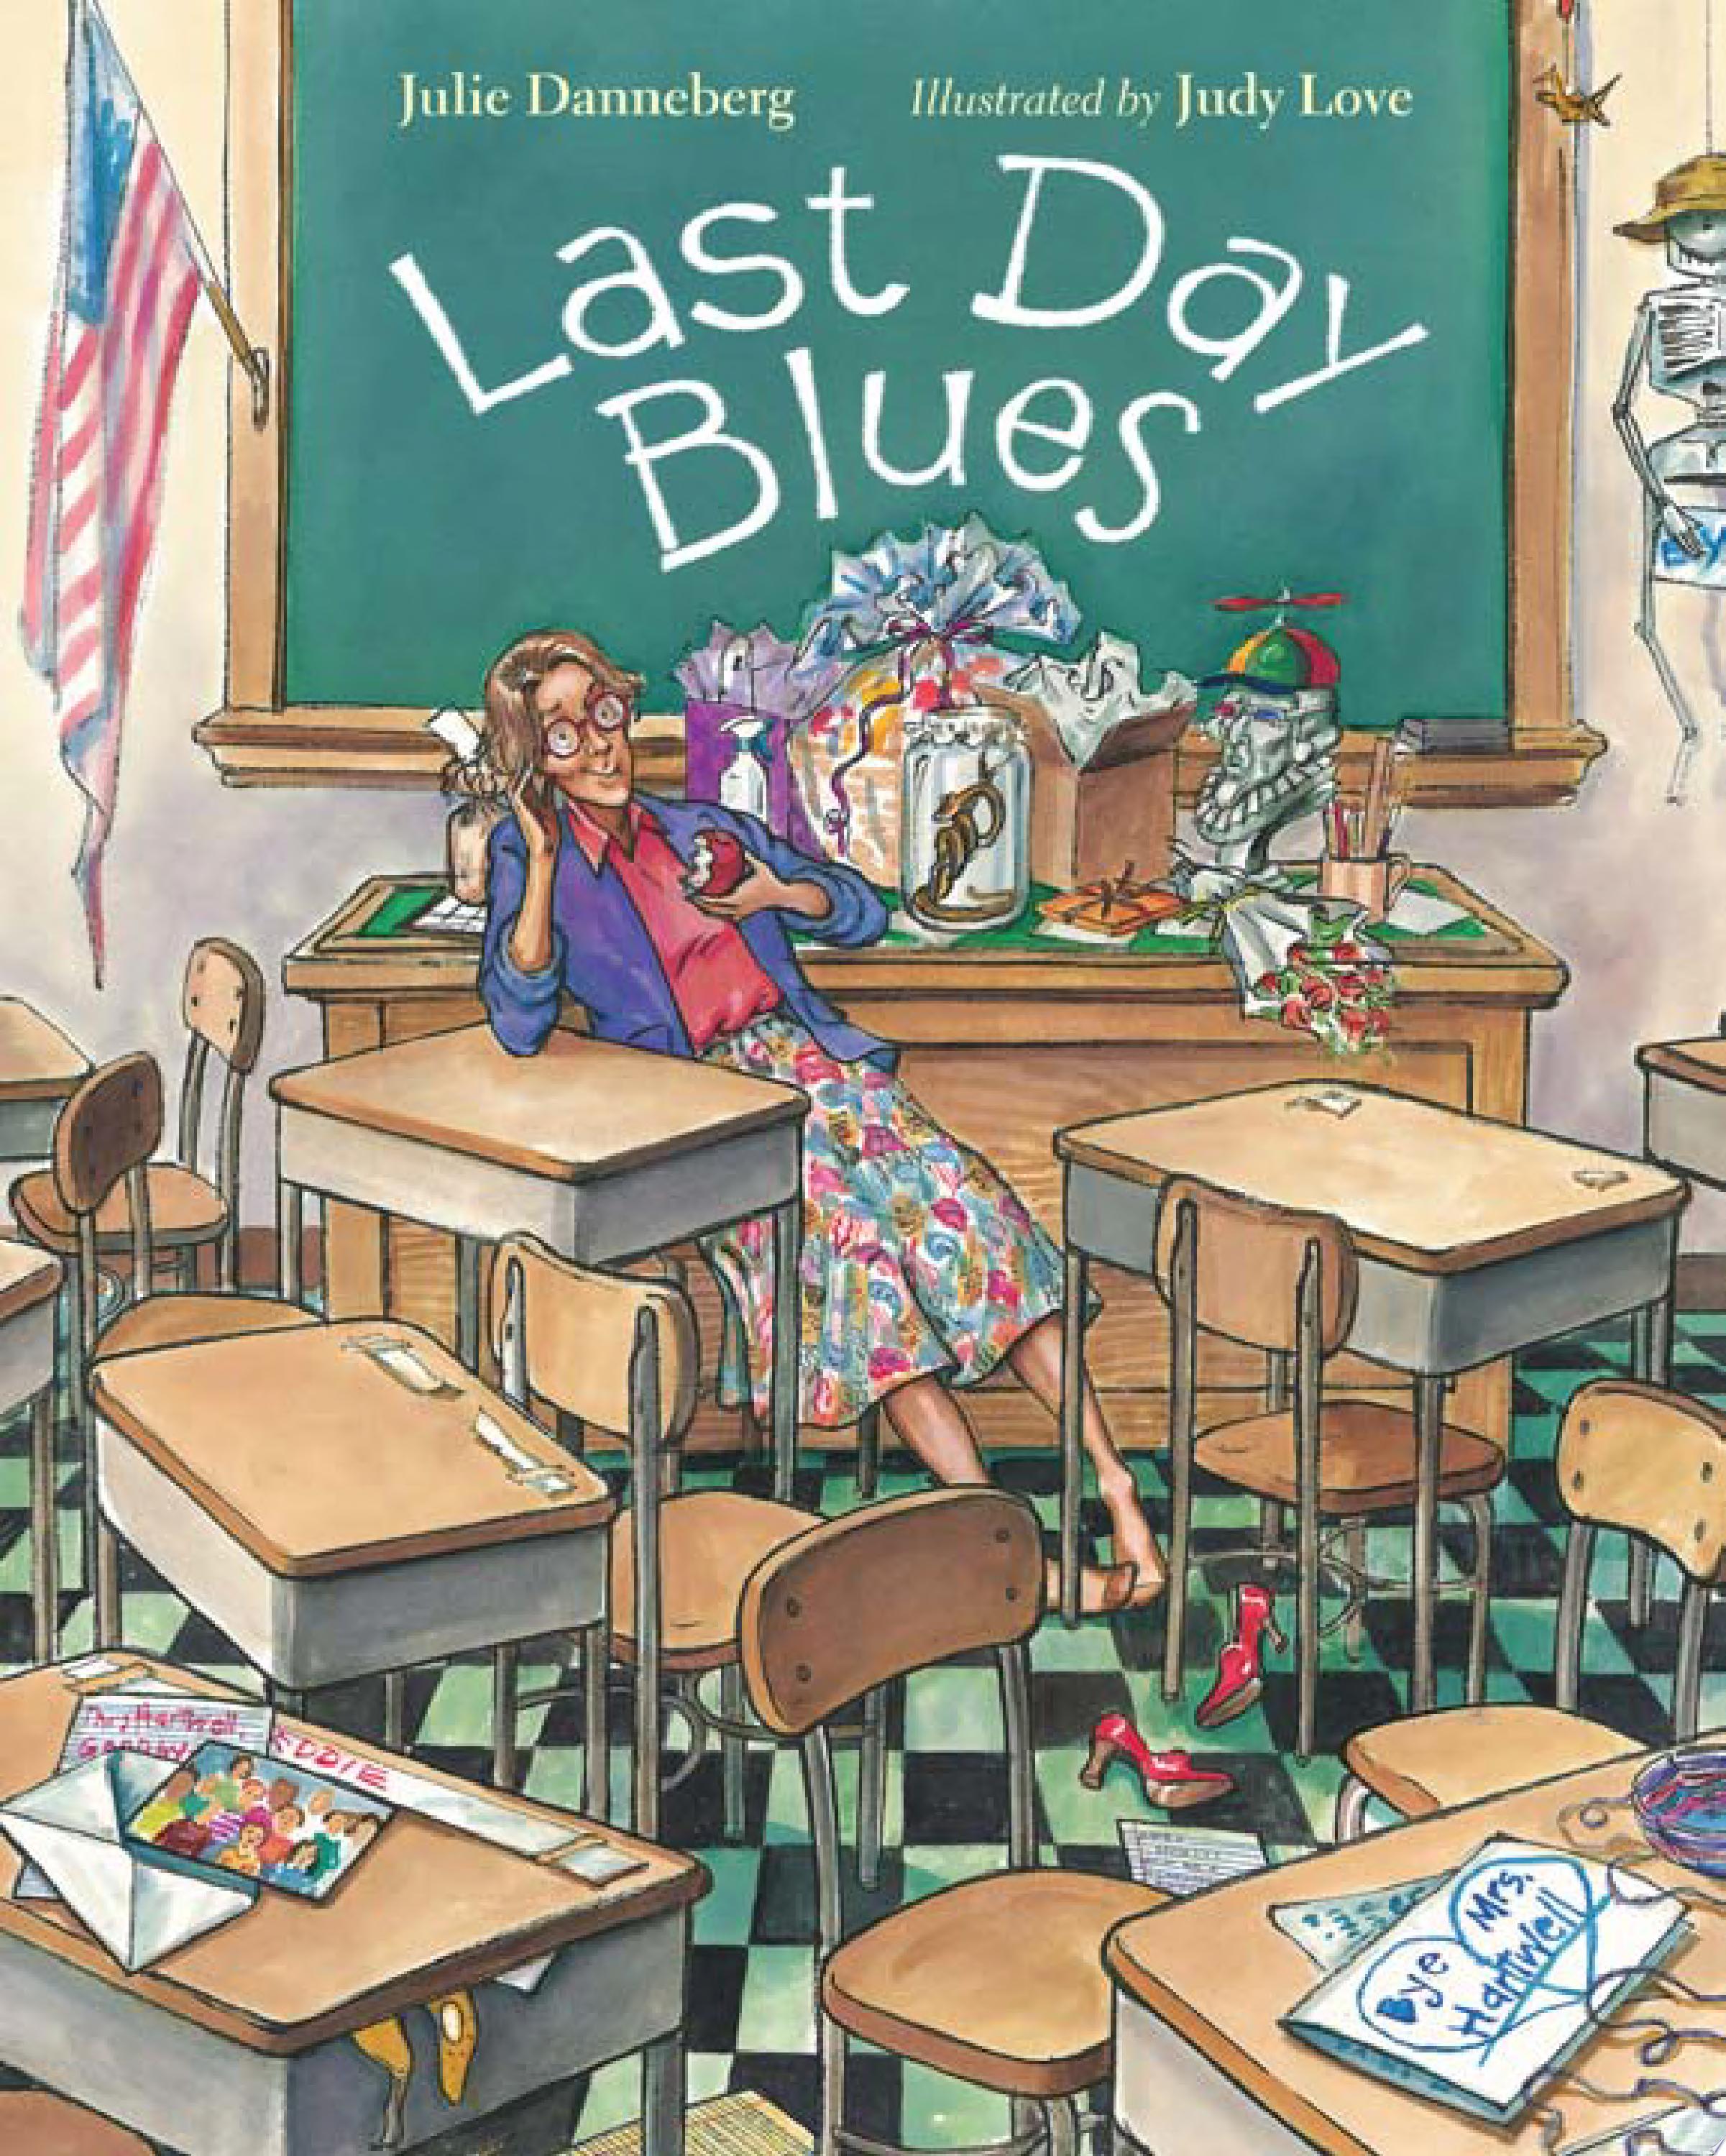 Image for "Last Day Blues"